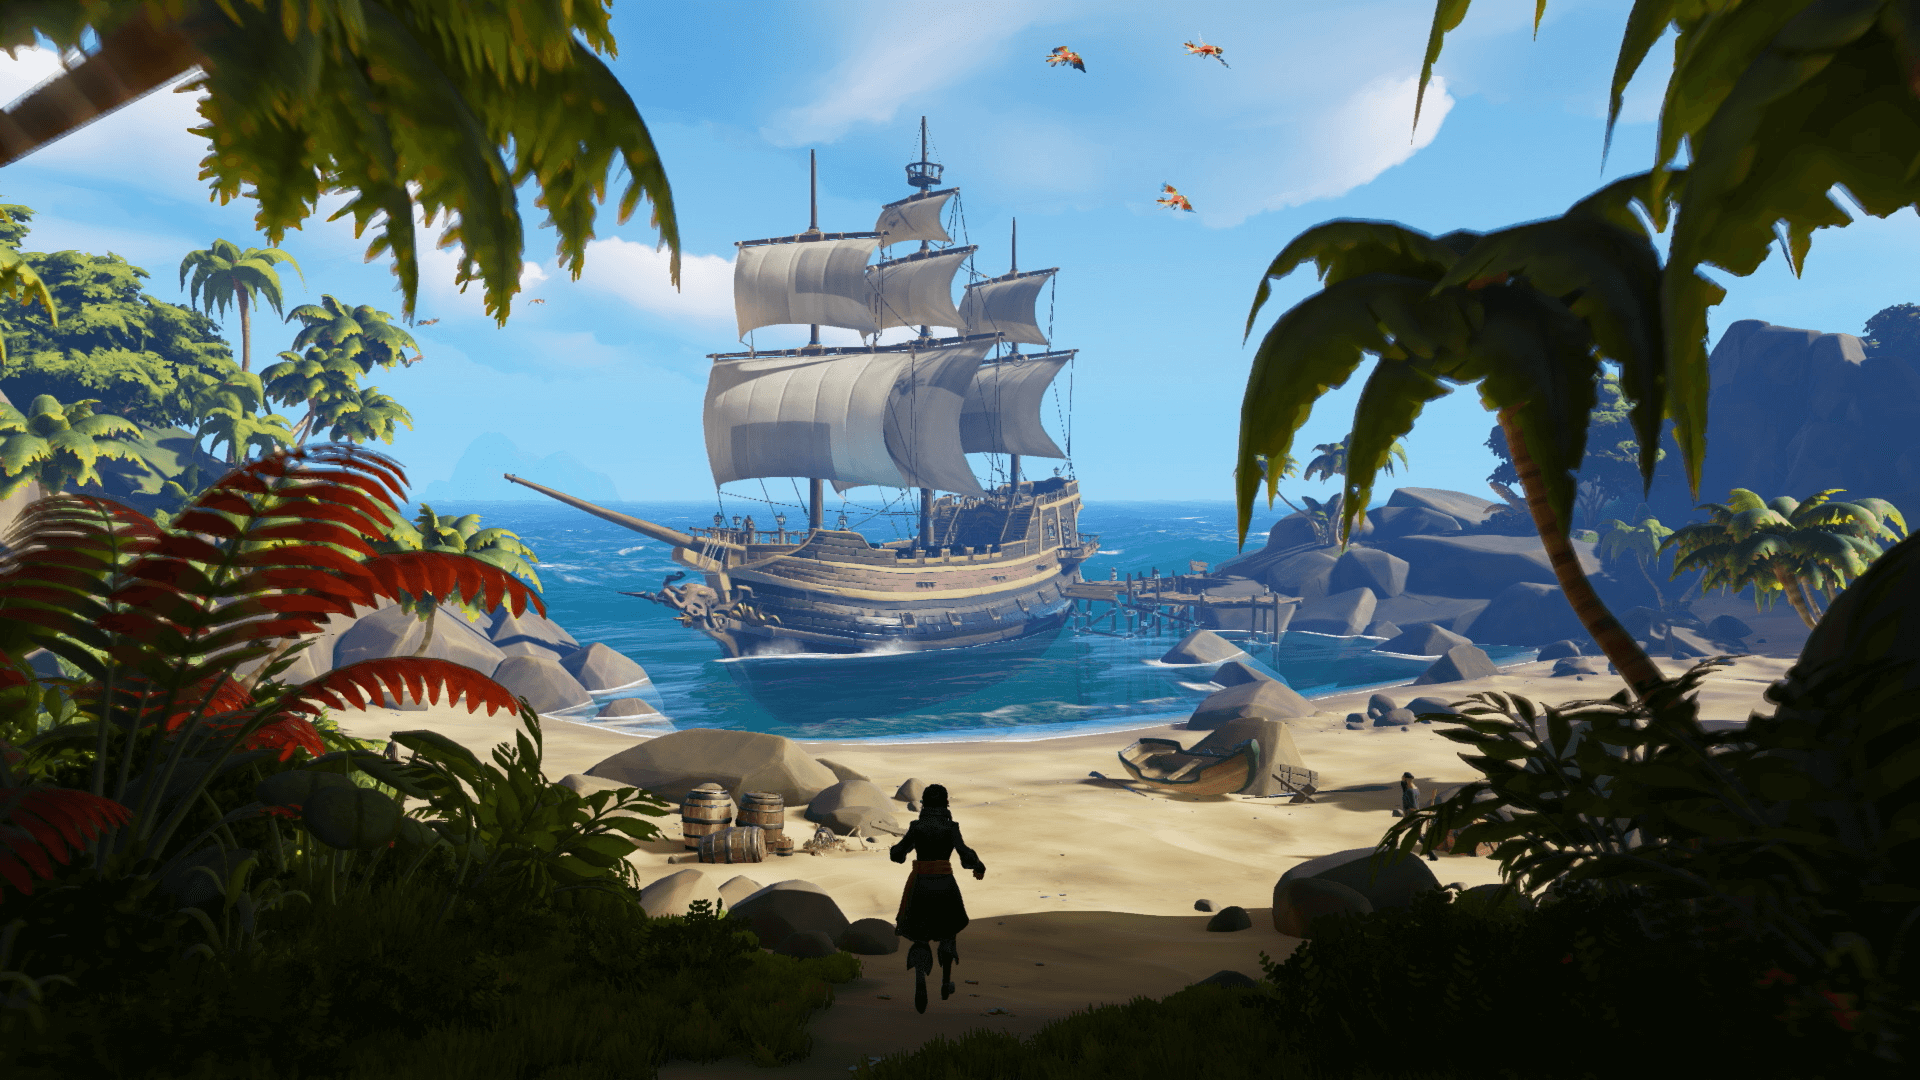 Video Game Sea Of Thieves HD Wallpaper | Background Image